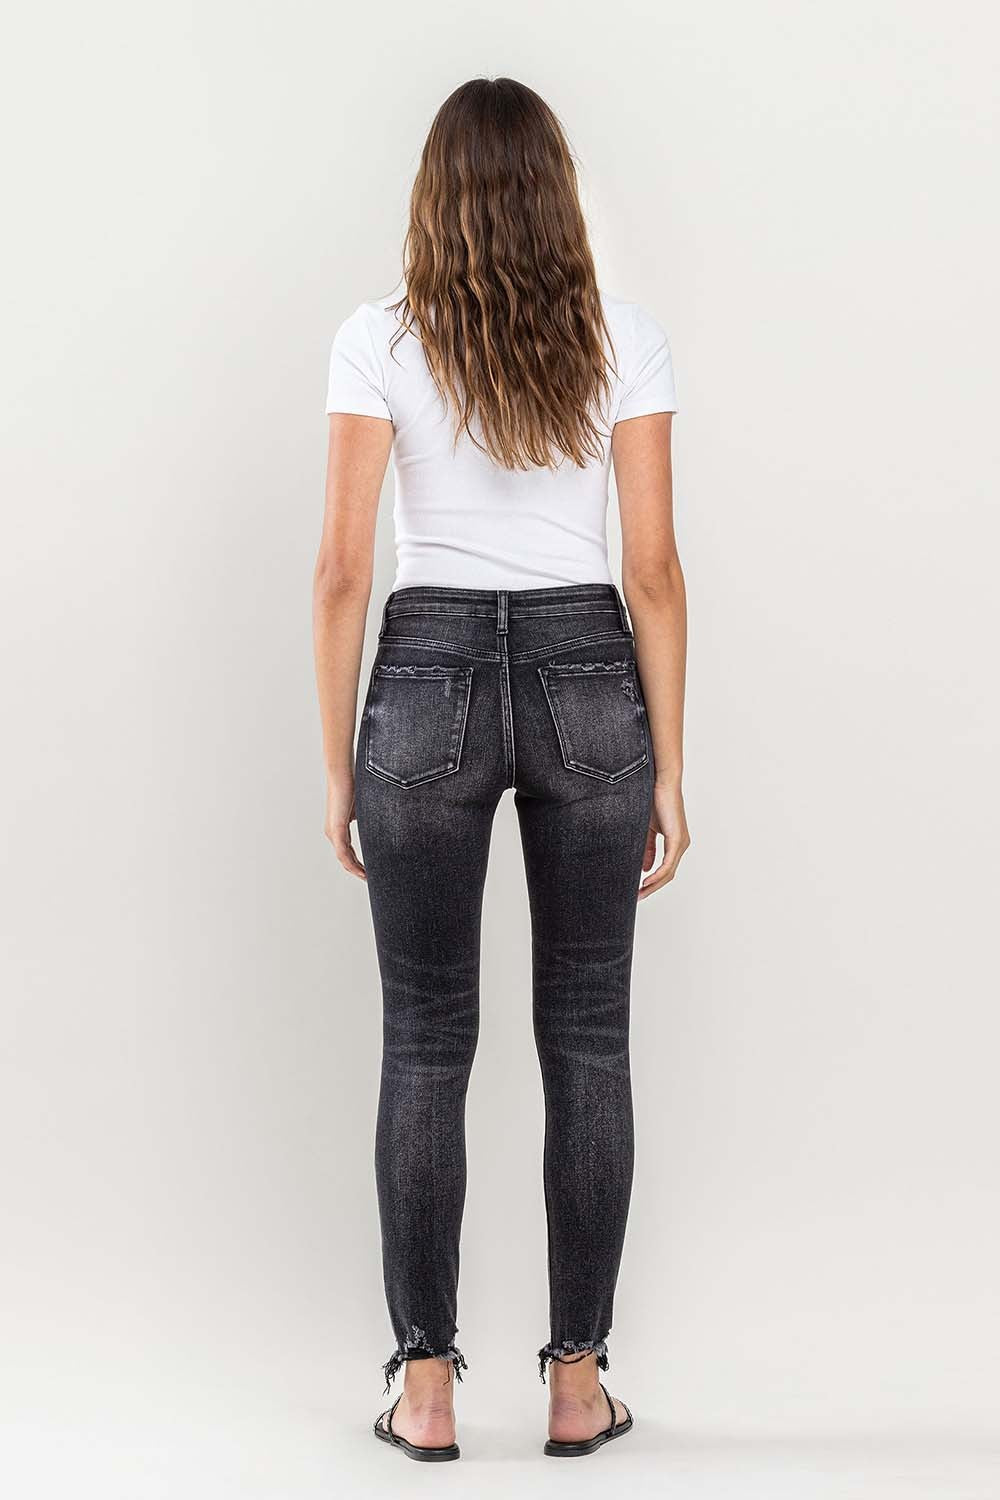 These raw hem cropped skinny jeans are a must-have for any fashion-forward individual. The raw hem adds a touch of edge to the classic skinny jeans silhouette. The cropped length is perfect for showcasing your favorite footwear. 24-32